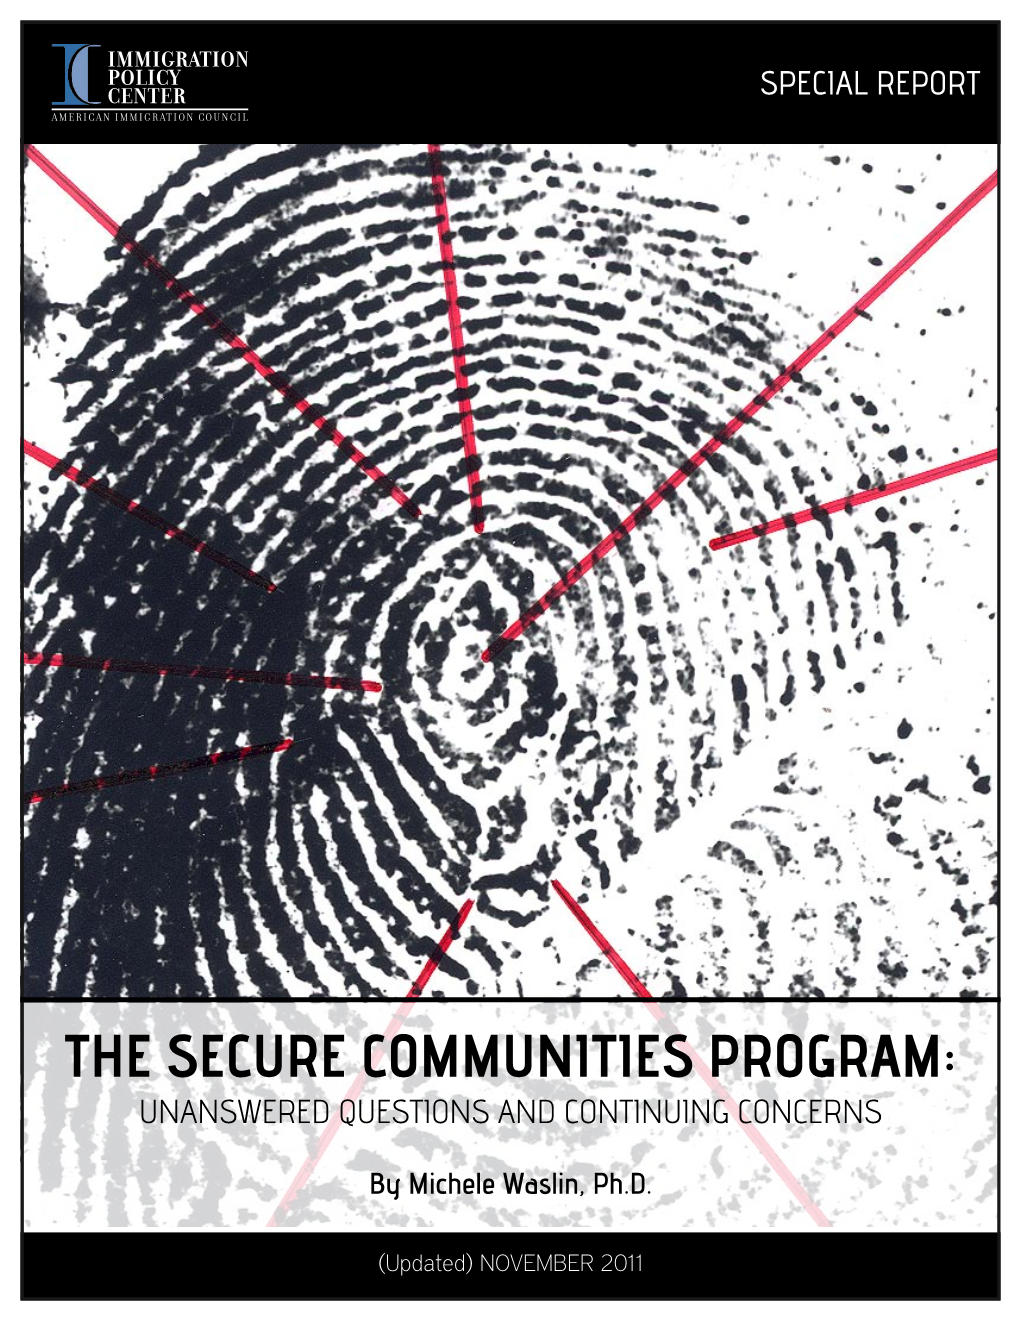 The Secure Communities Program: Unanswered Questions and Continuing Concerns